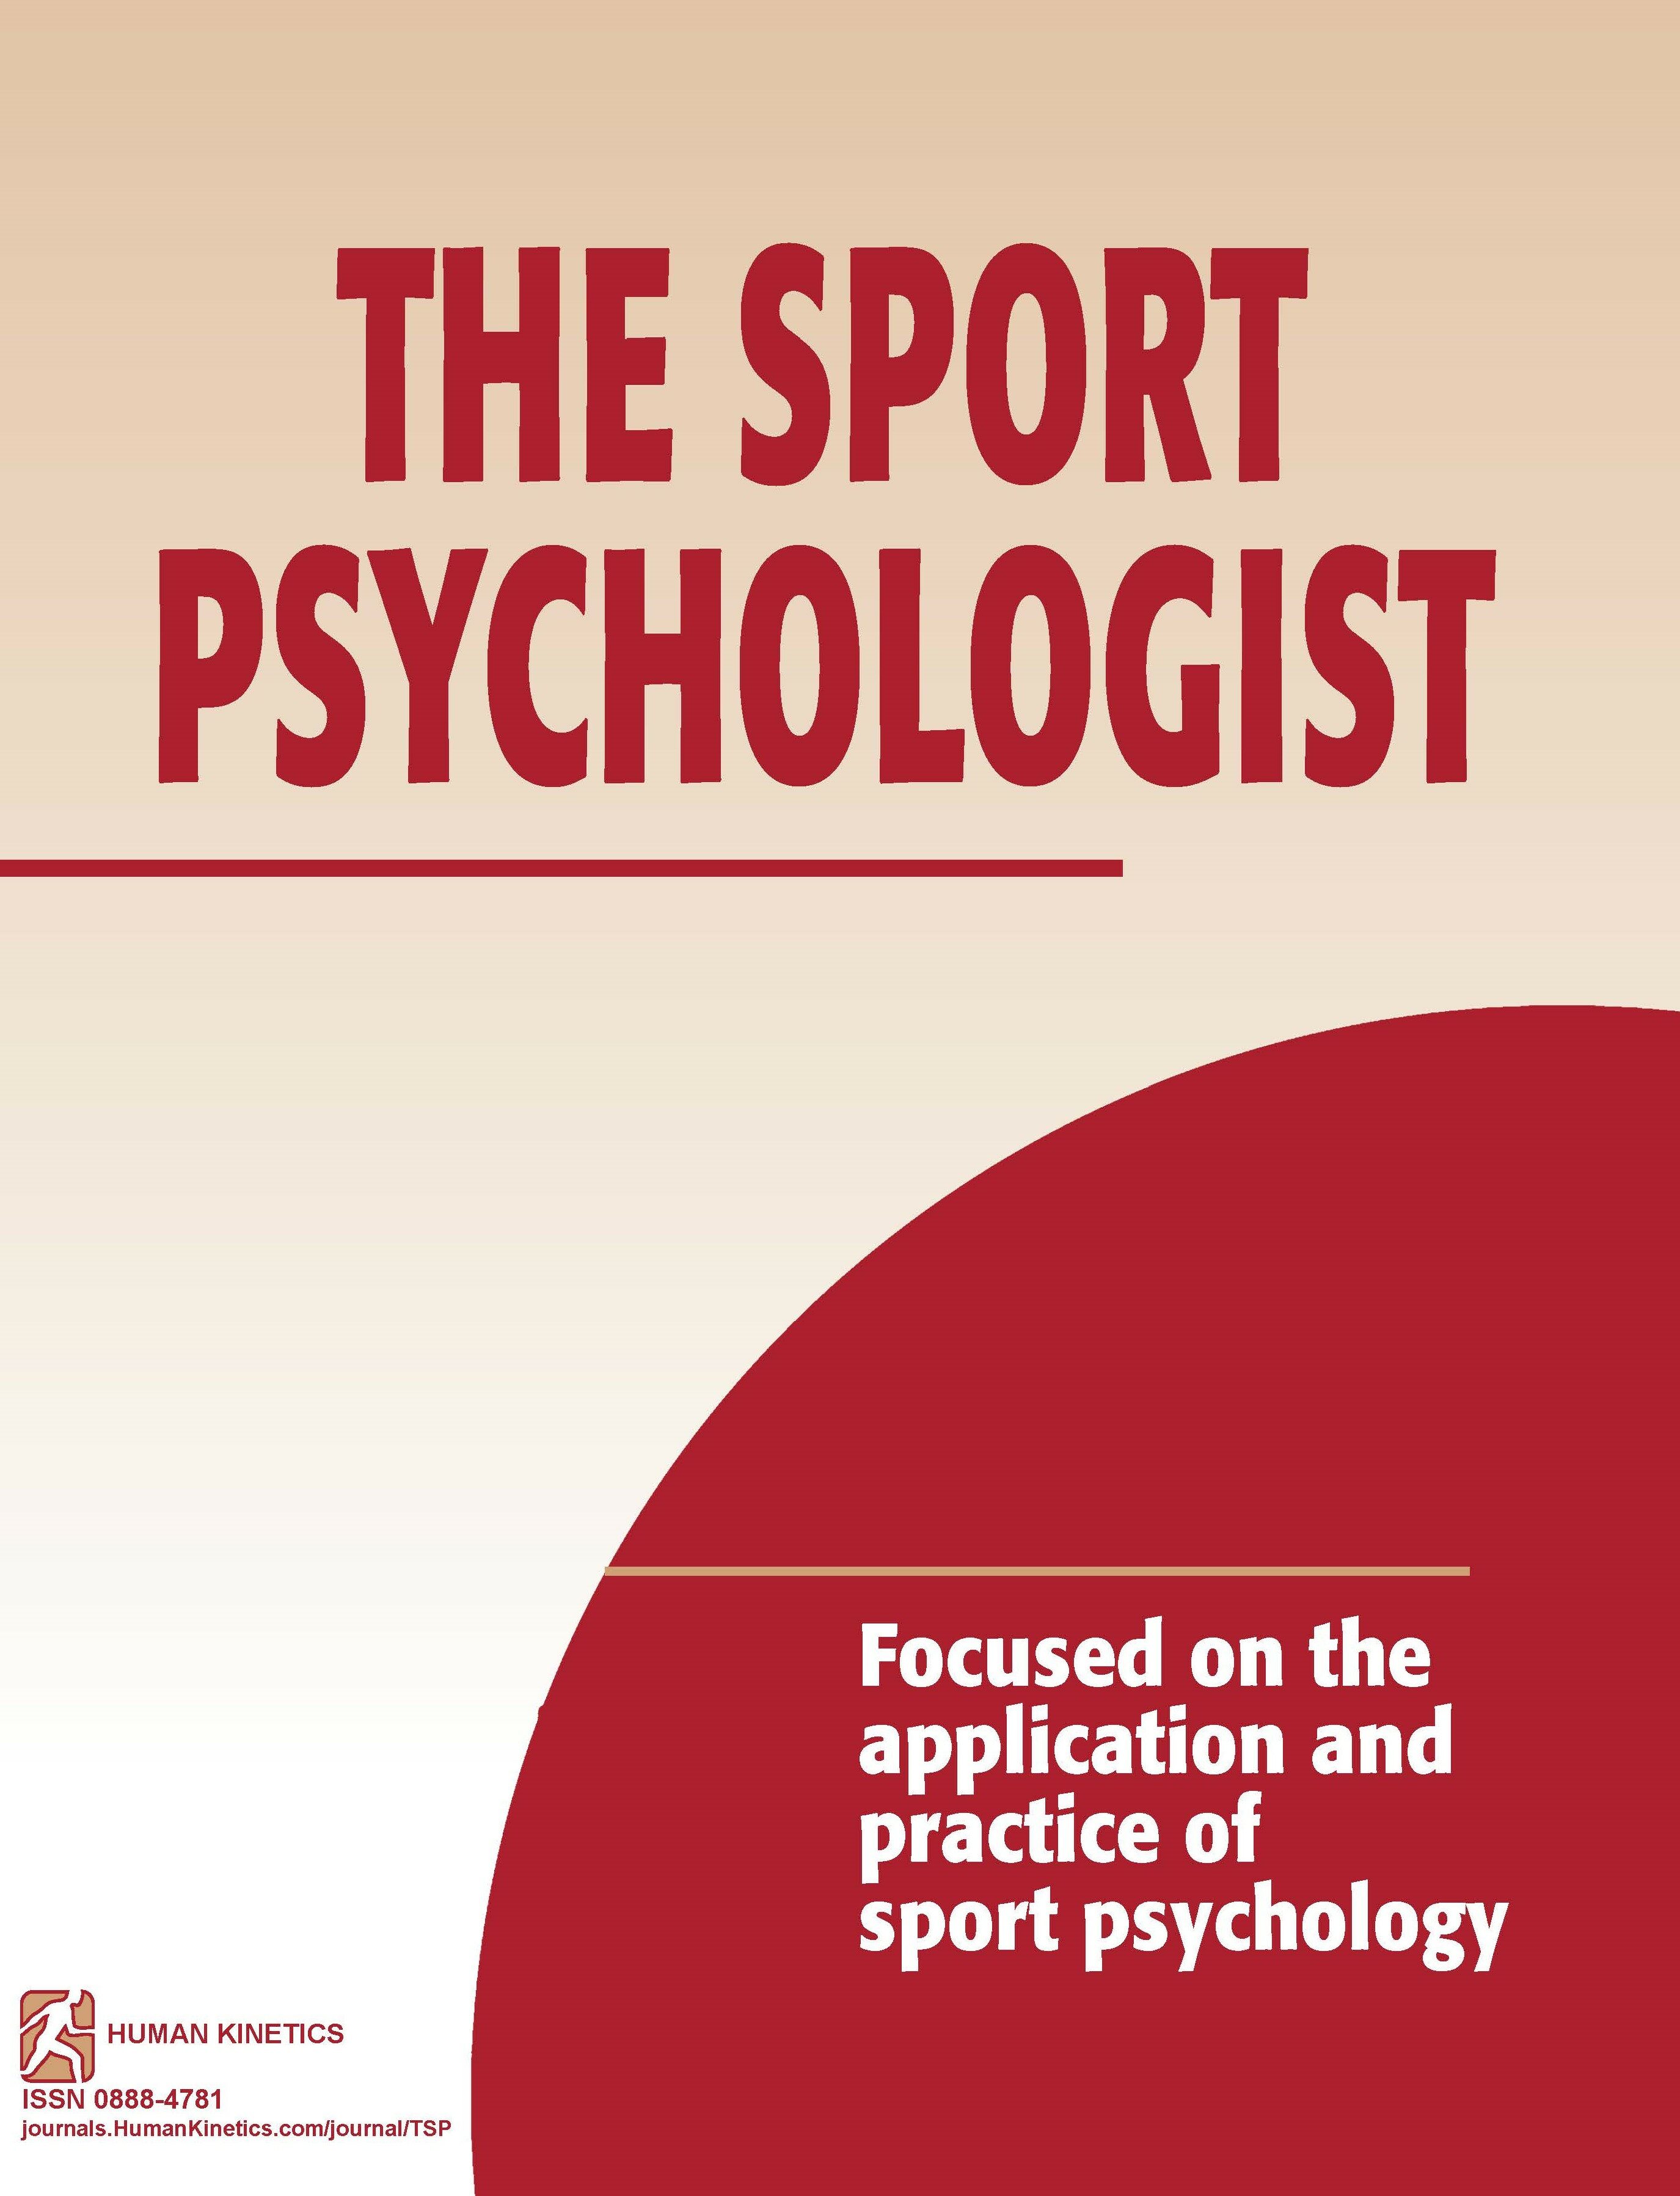 A Penny for Your Thoughts: Athletes’ and Trainee Sport Psychologists’ Internal Dialogue During Consultations